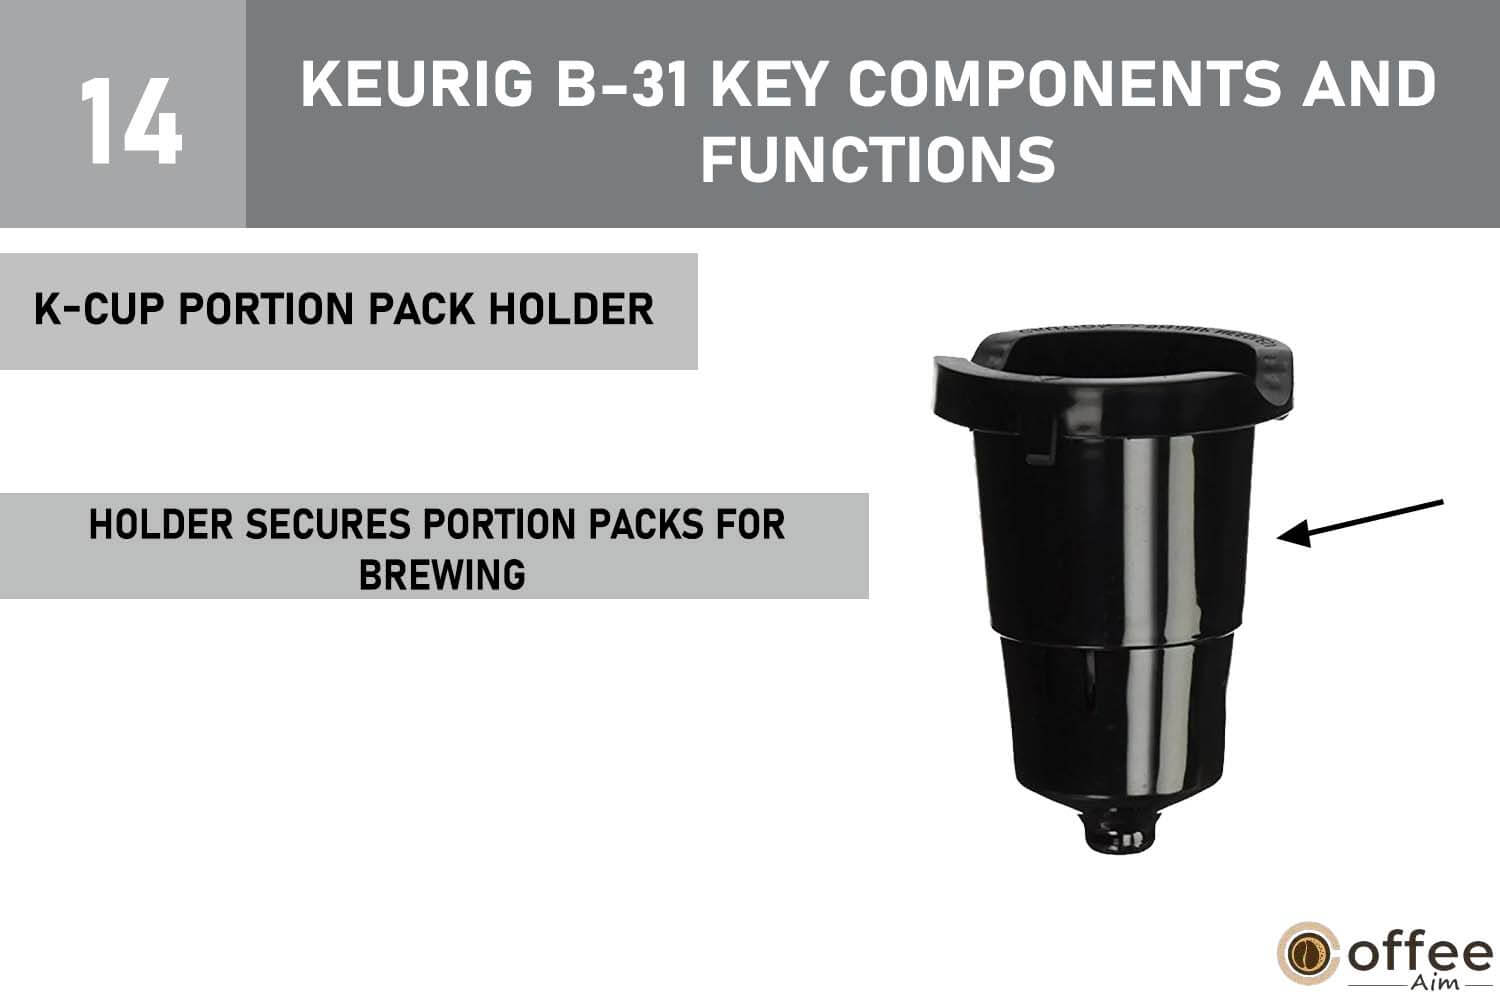 This image illustrates the component "K-Cup Portion Pack Holder" of the Keurig B-31 coffee maker, as part of the comprehensive guide on how to operate the machine.